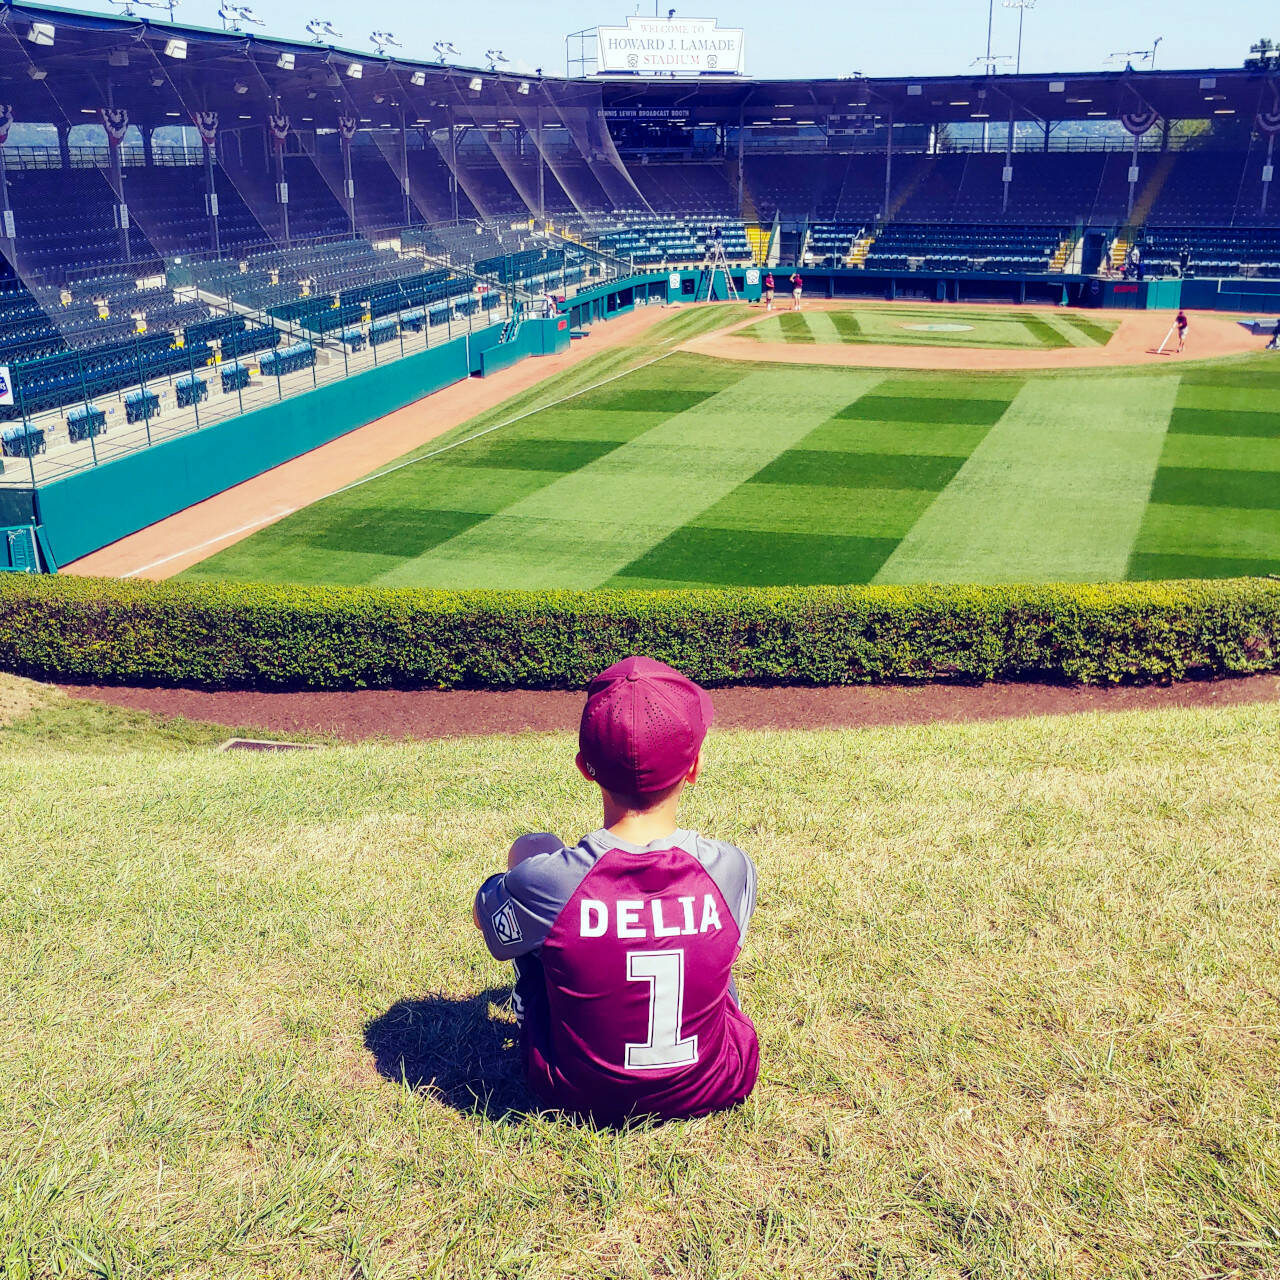 SUBMITTED PHOTO 
Montesano Little Leaguer Kesten Delia looks over the field at Lamade Stadium in Williamsport, Penn., in late August. Delia and his grandfather, John, attended several Little League World Series games including the championship game on Sunday, Aug. 28, 2022.